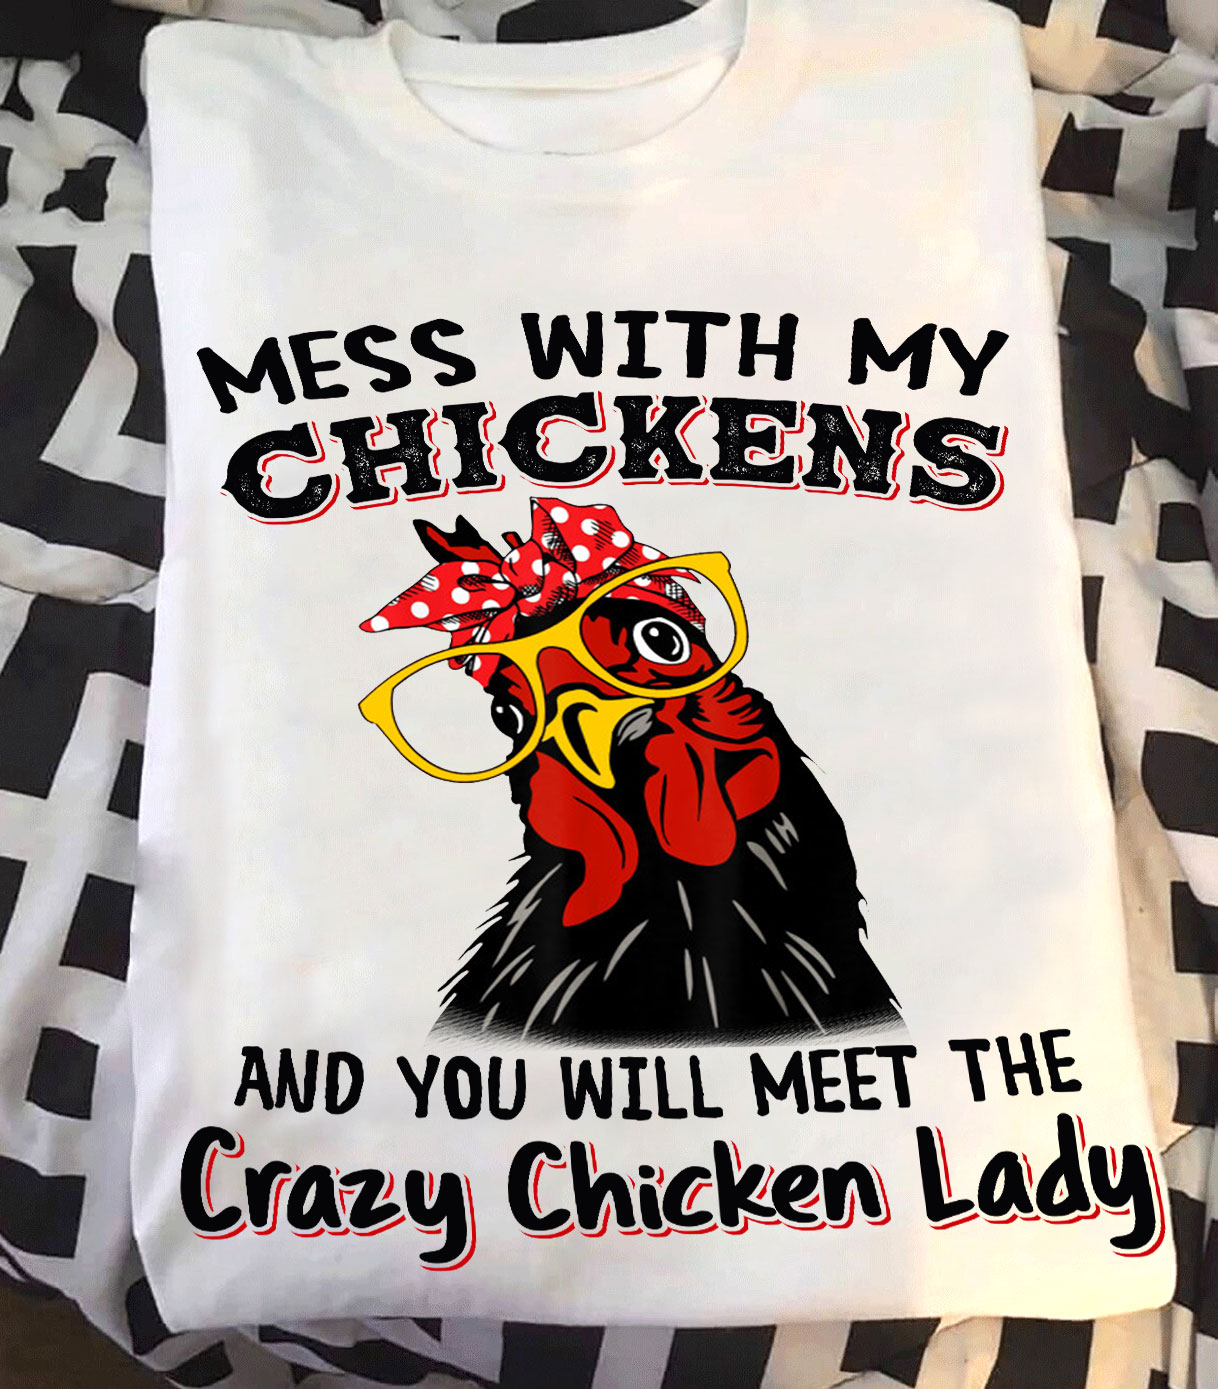 Mess With My Chicken And You Meet The Crazy Chicken Lady Shirt Hoodie Sweatshirt Fridaystuff